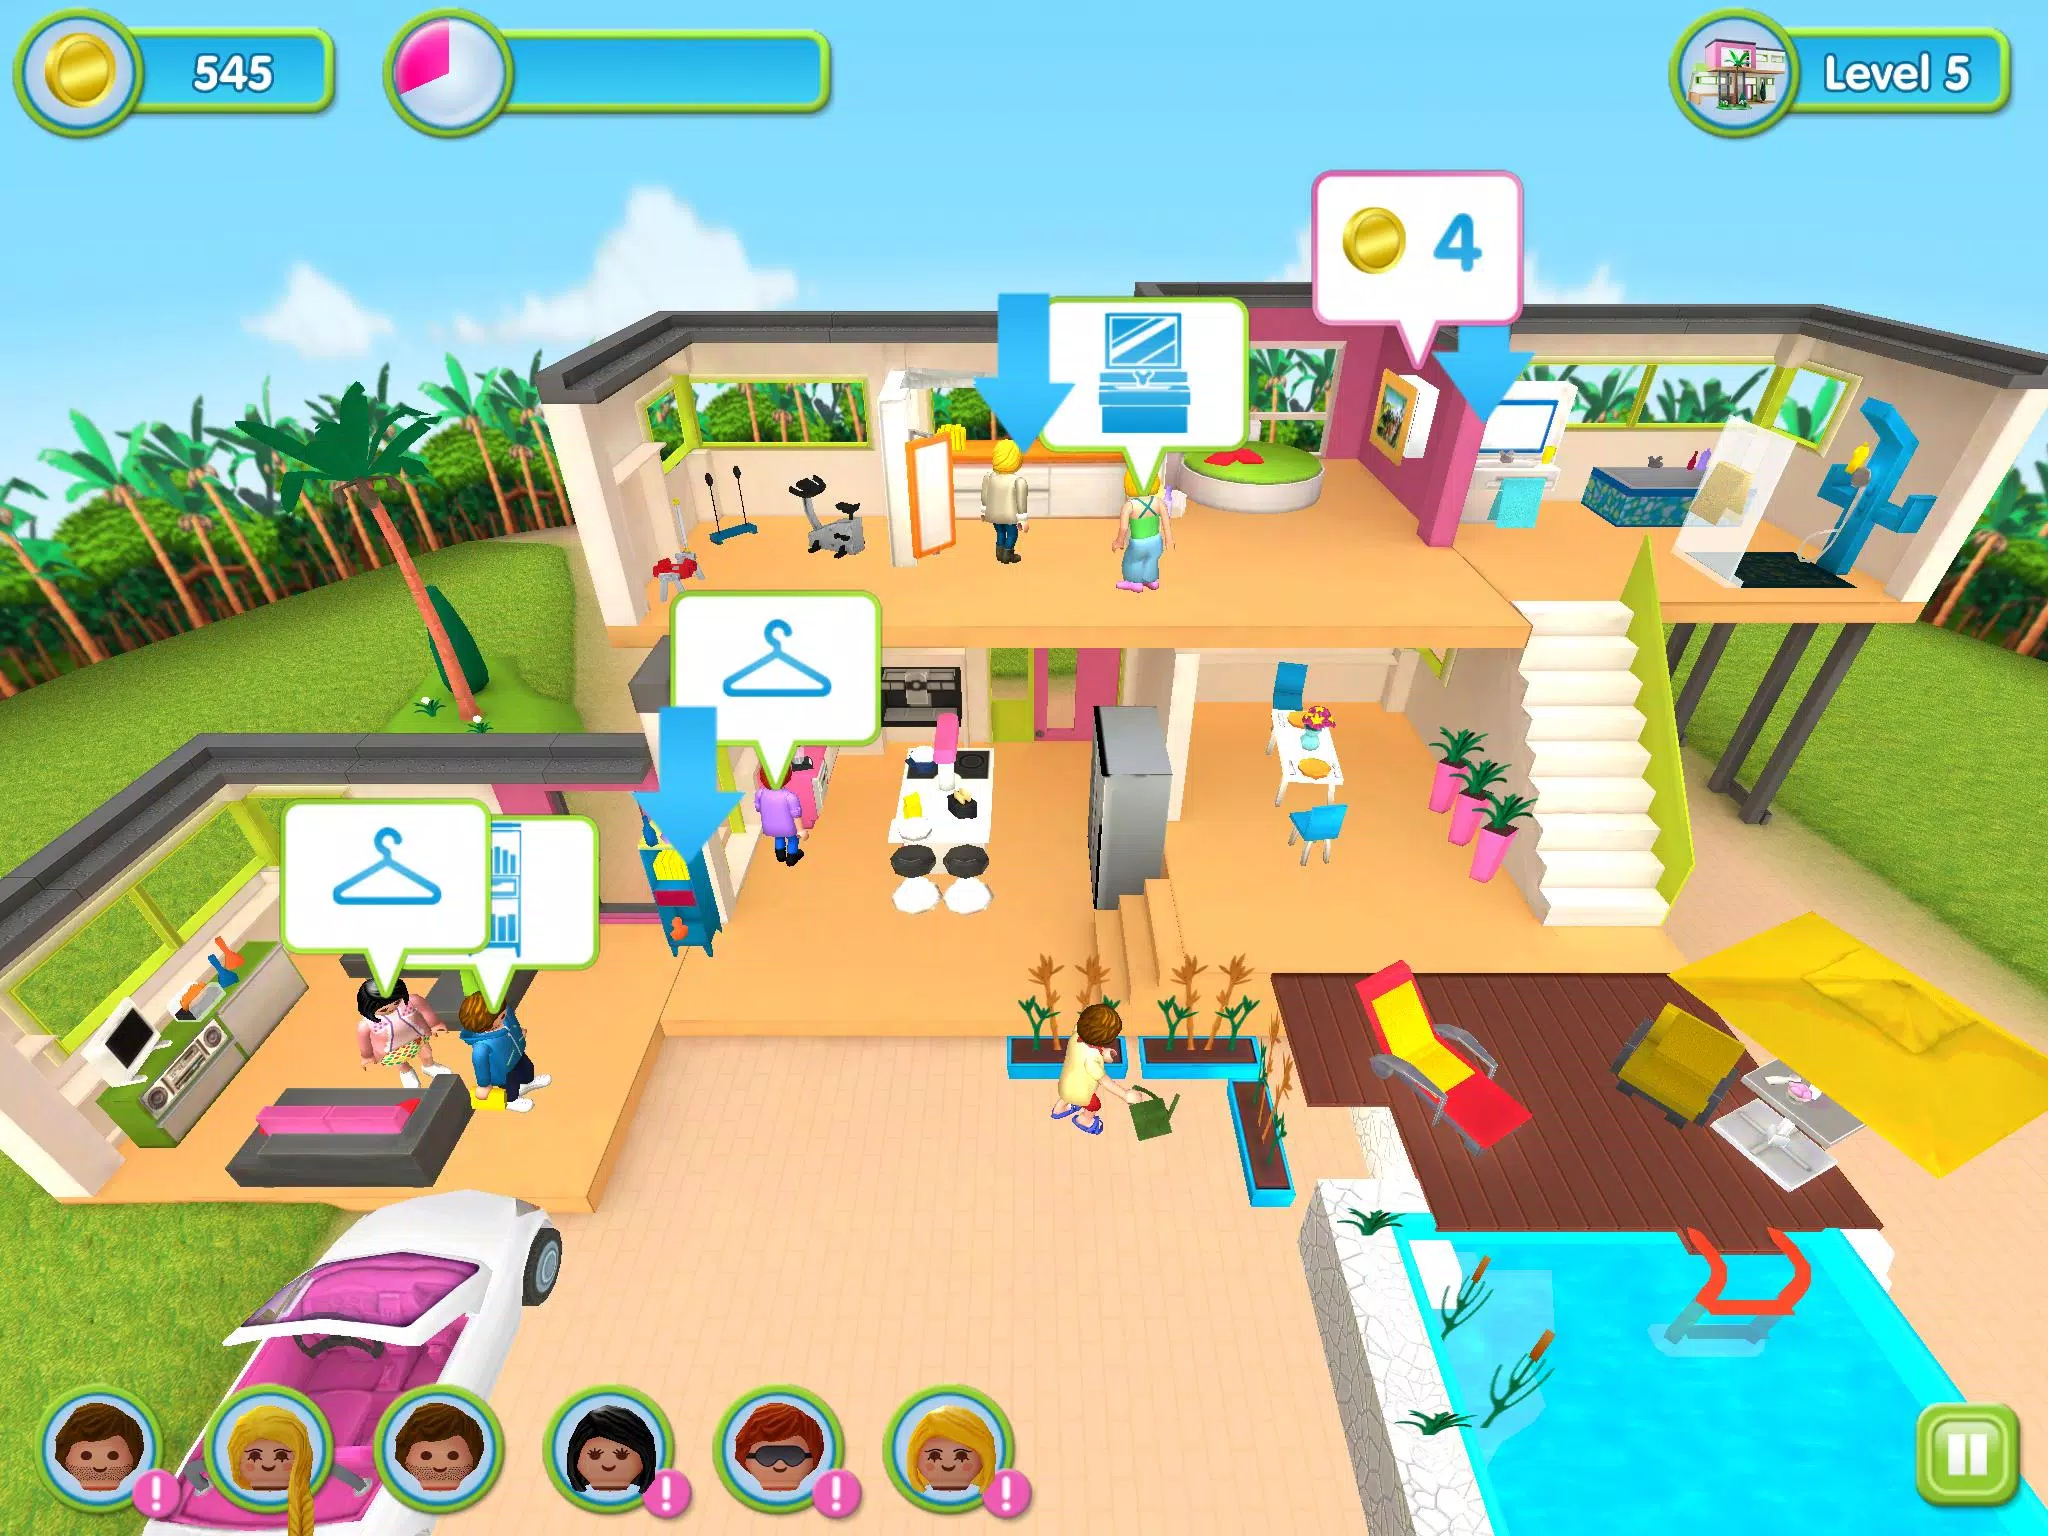 PLAYMOBIL Luxusvilla for Android - APK Download